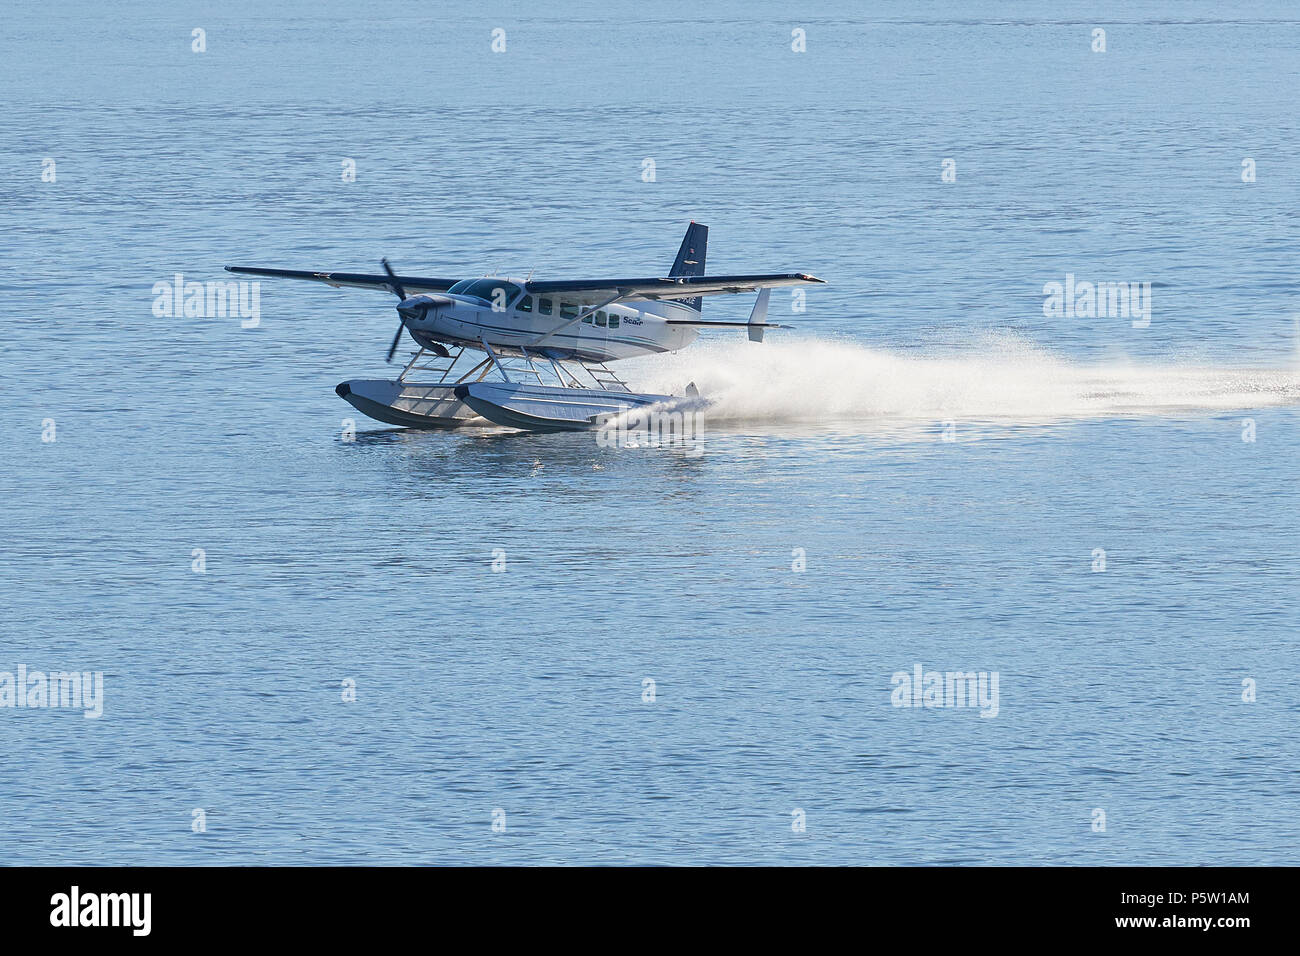 Seair Seaplanes Cessna 208 Caravan Float Plane Landing On The Water At The Vancouver Harbour Airport, BC, Canada. Stock Photo